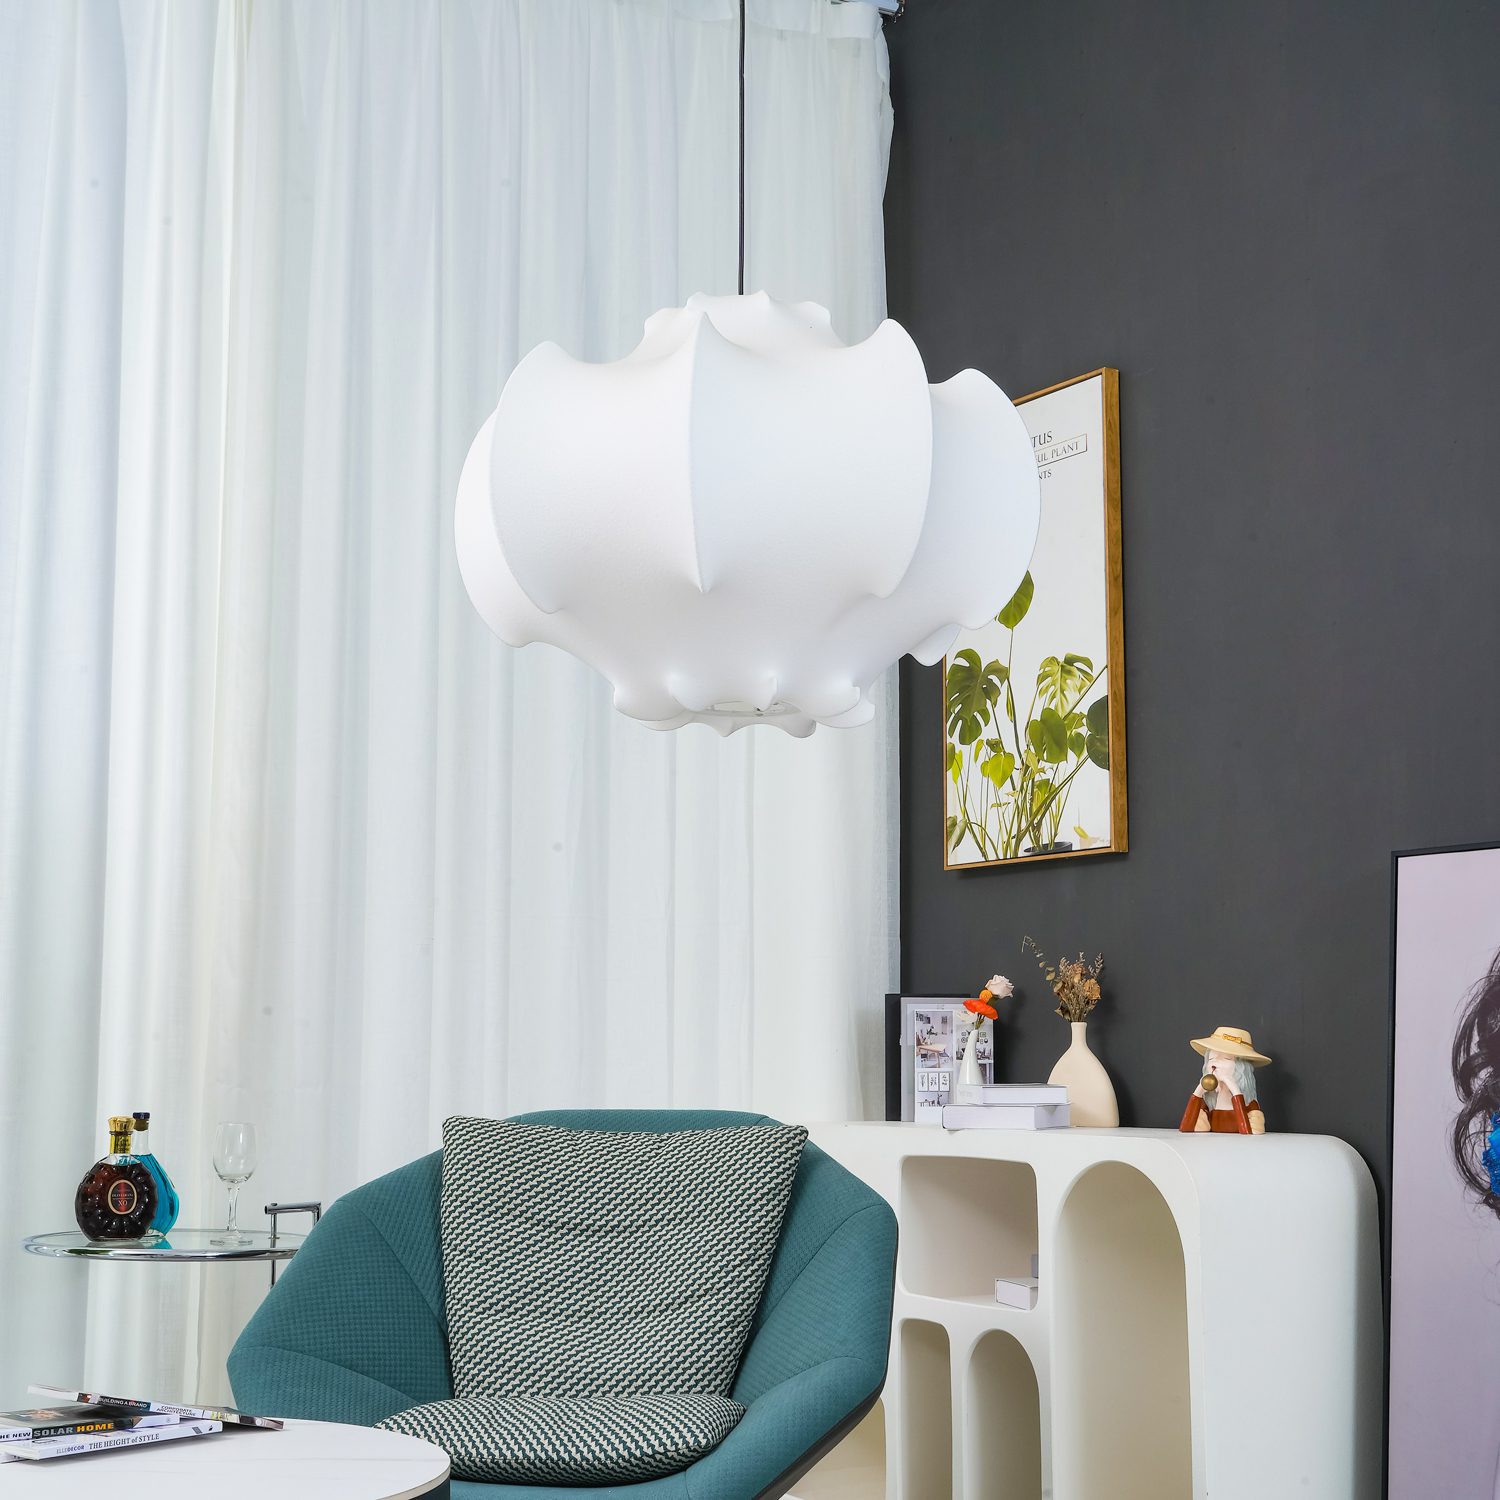 Get the Look for Less: Finding the Perfect Viscontea Suspension Lamp Dupe